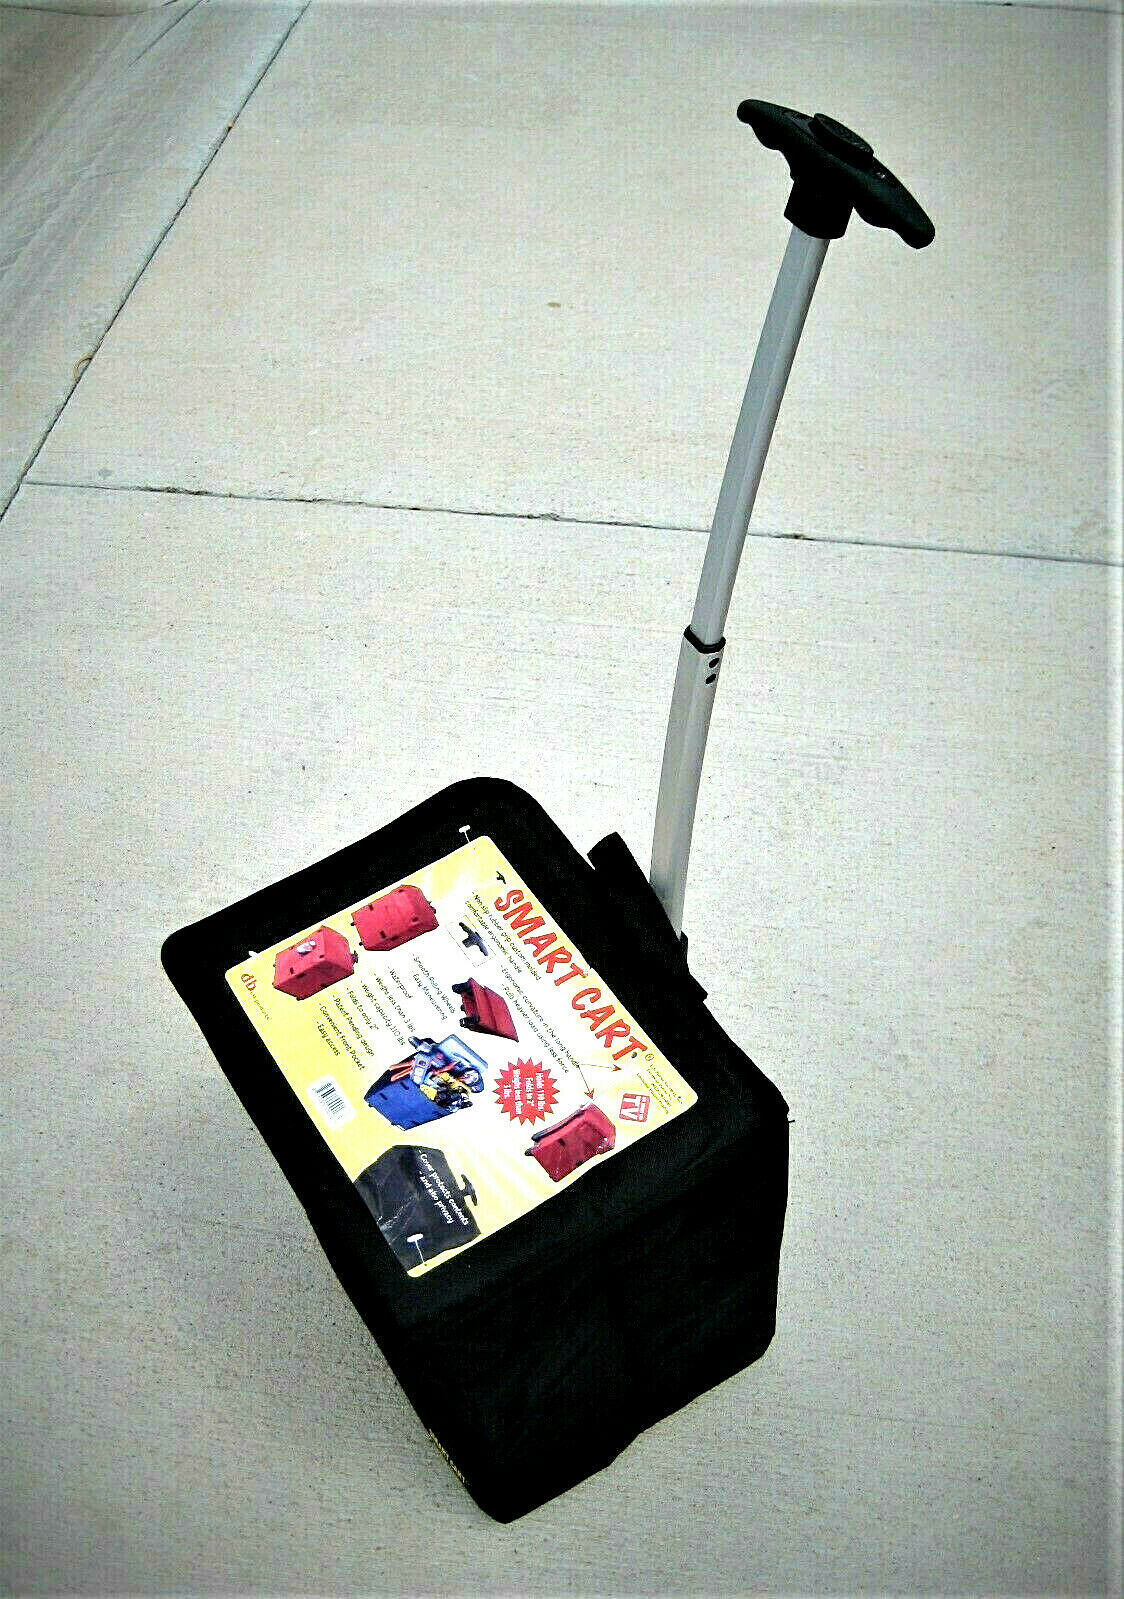 Smart Cart (Rolling Pull Cart) - As Seen On TV by dbest products - NEW!